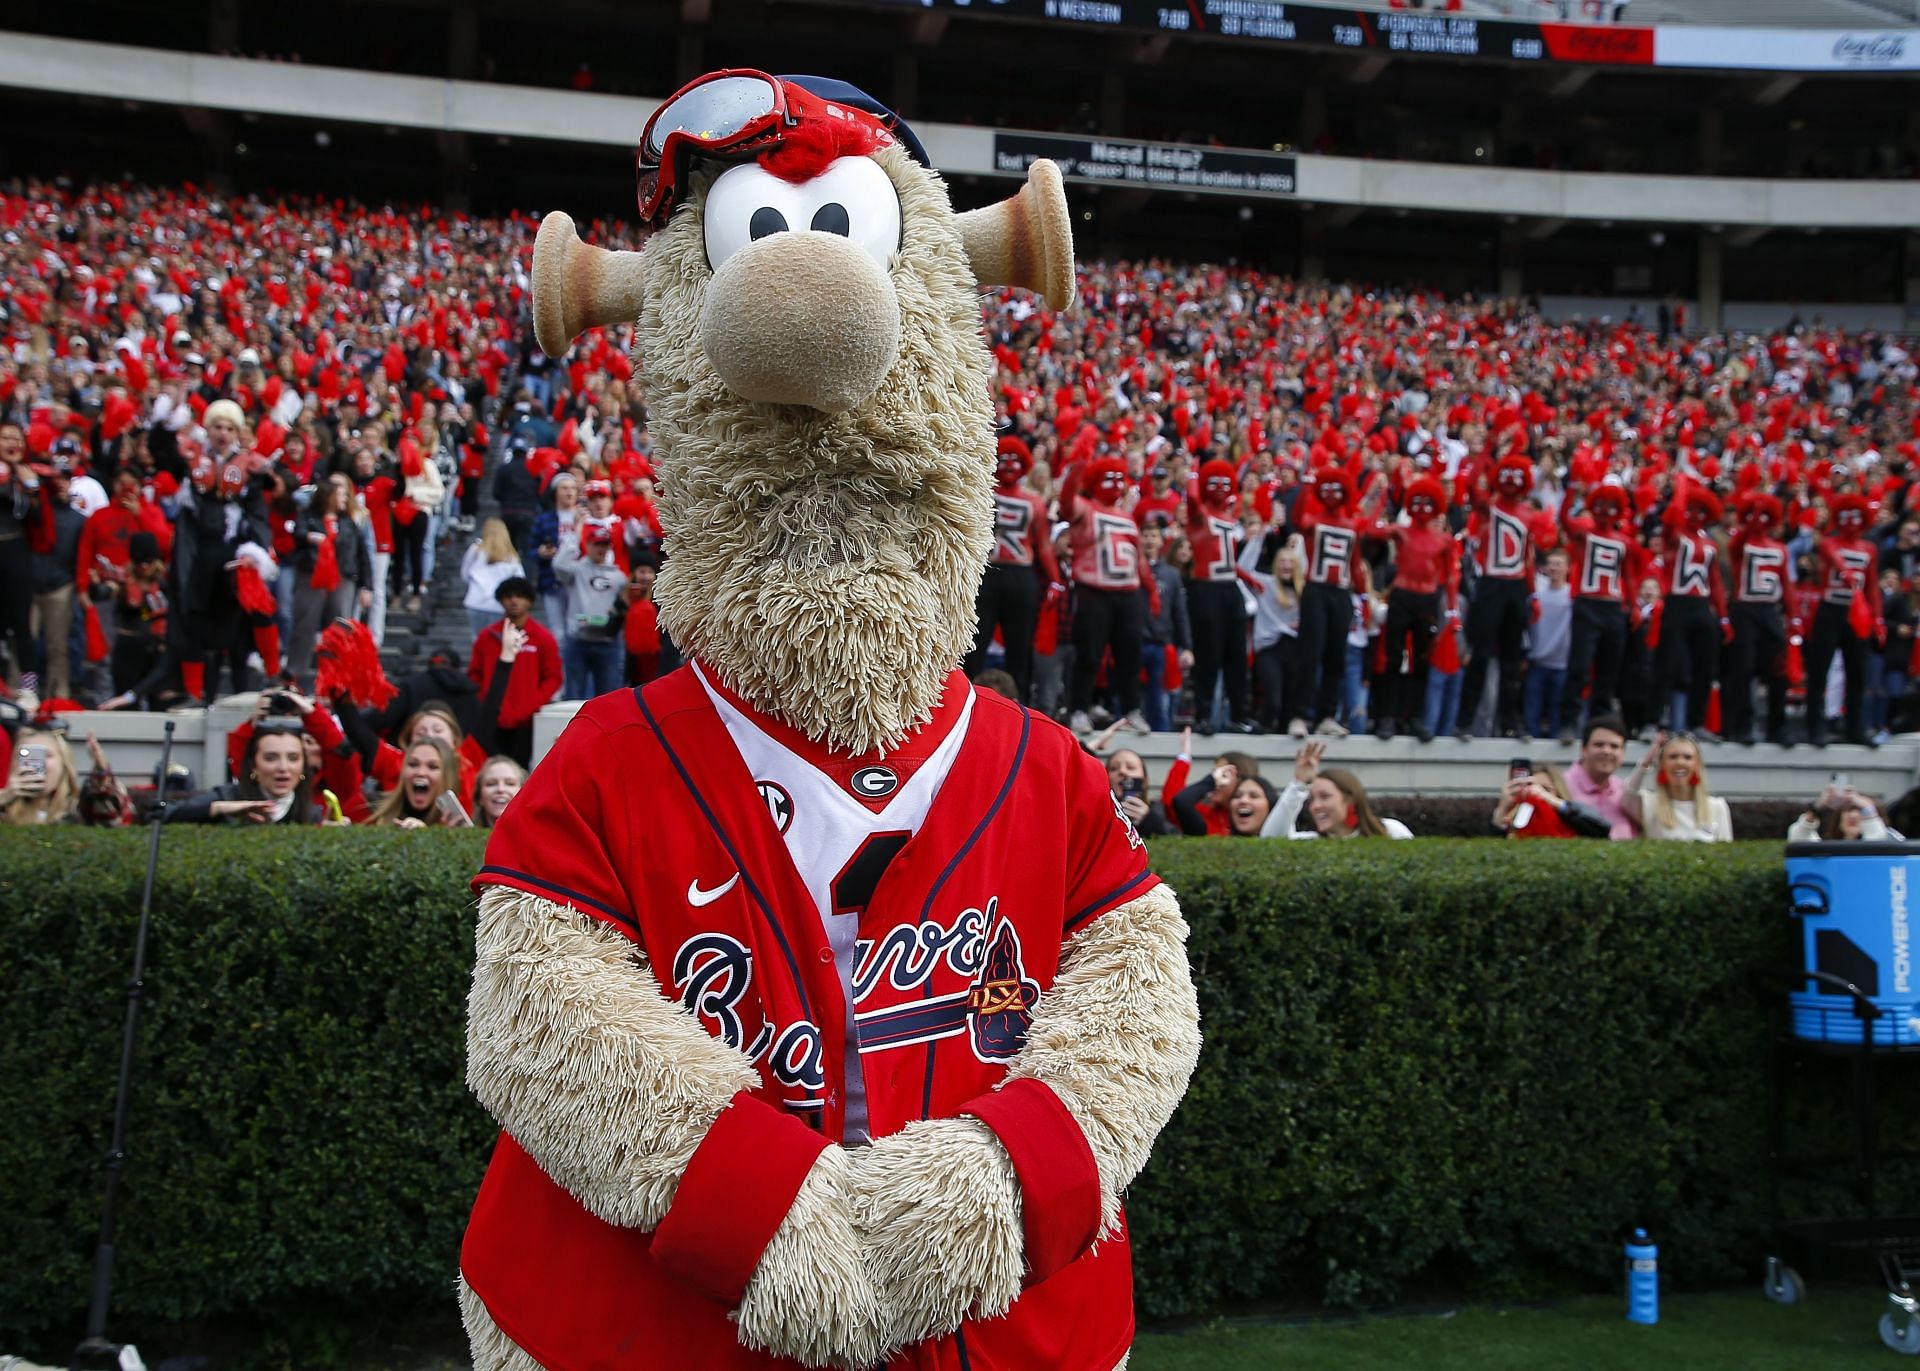 Braves mascot Blooper pokes fun at trophy making company for misspelling  'Valuable' as 'Valuble' in Cy Young Awards